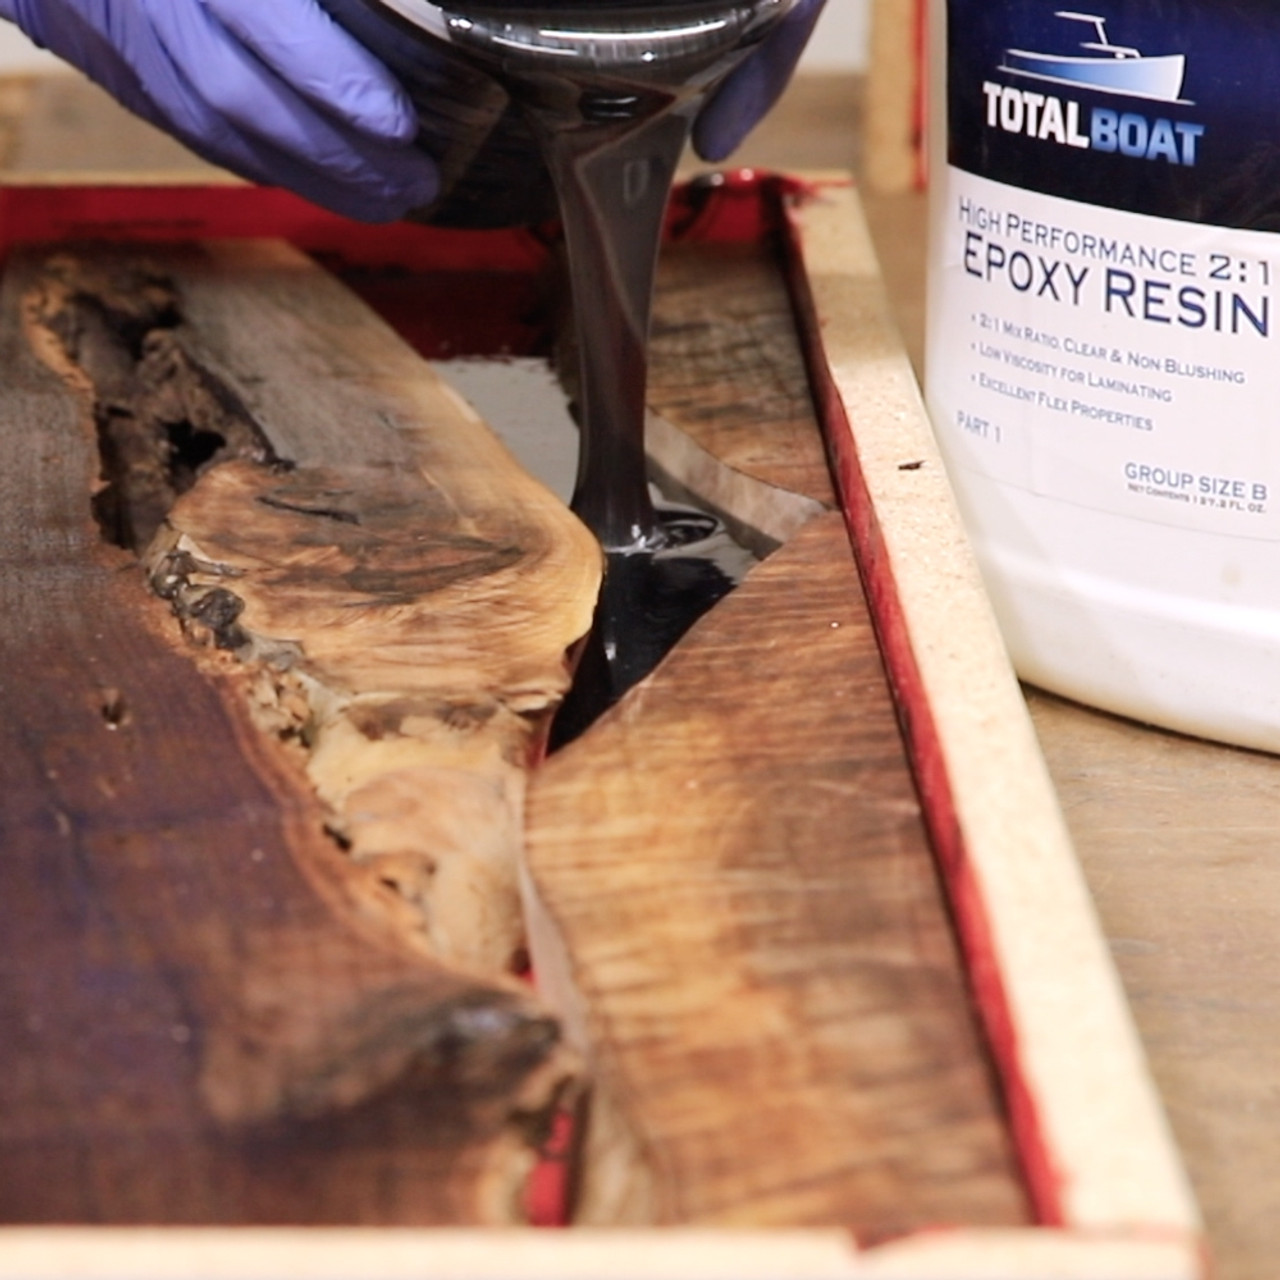 TotalBoat Epoxy Resin - Epoxy Resin For Arts And Crafts